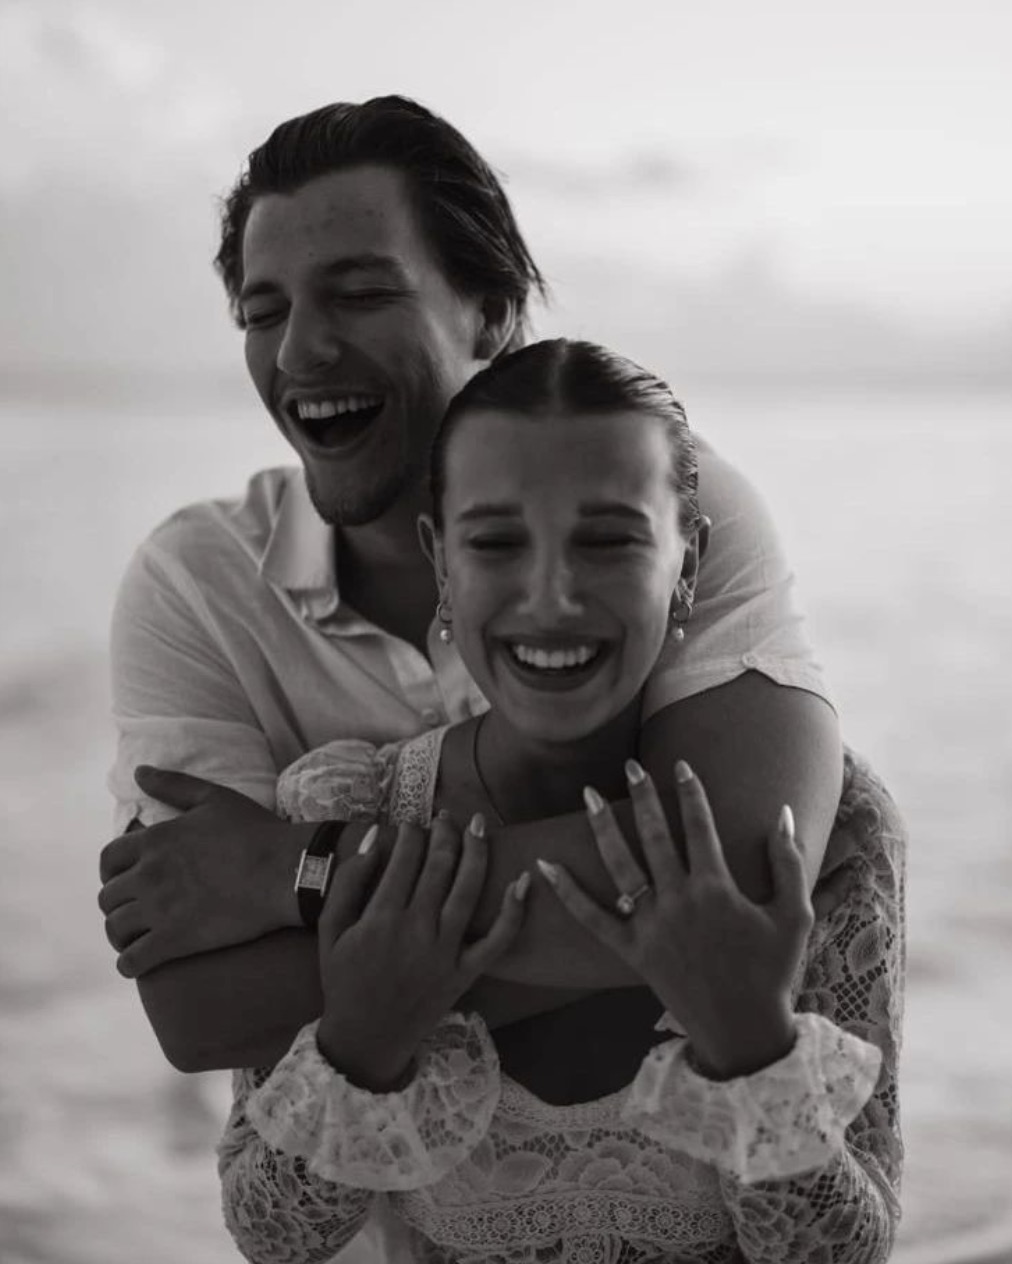 Stranger Things Star Millie Bobby Brown Spills the Tea on Wedding Plans and Why Jon Bon Jovi Won't Sing at Her Big Day